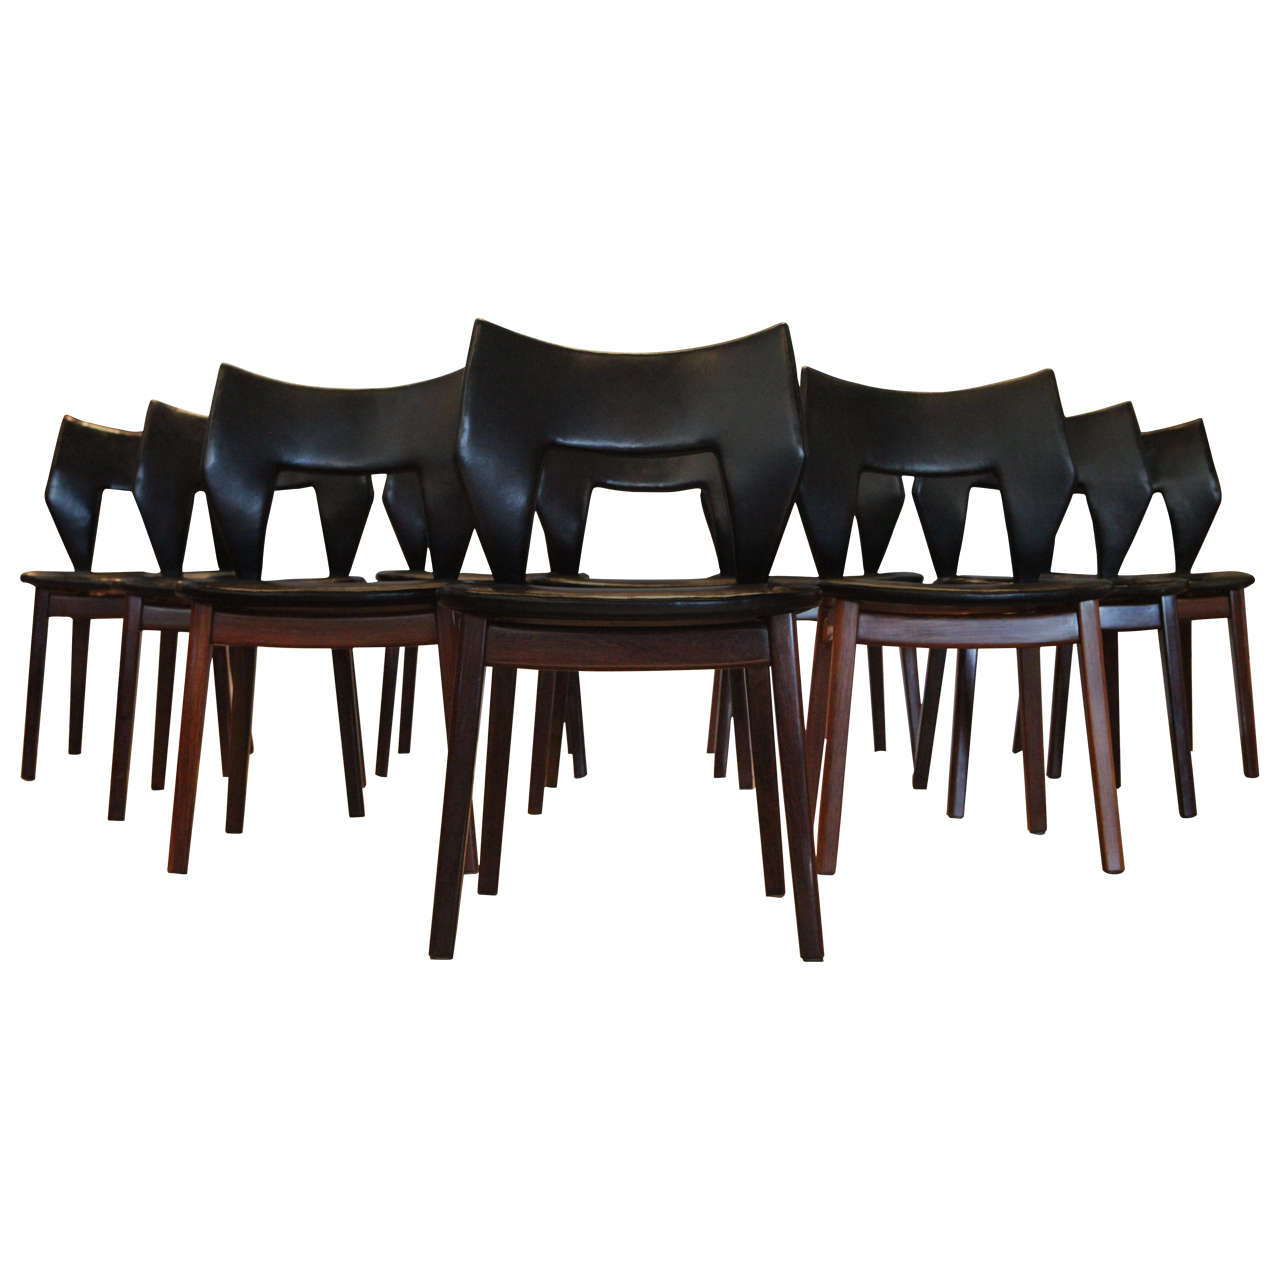 Set of 10 Tove and Edvard Kindt-Larsen Rosewood Dining Chairs, Denmark, 1960